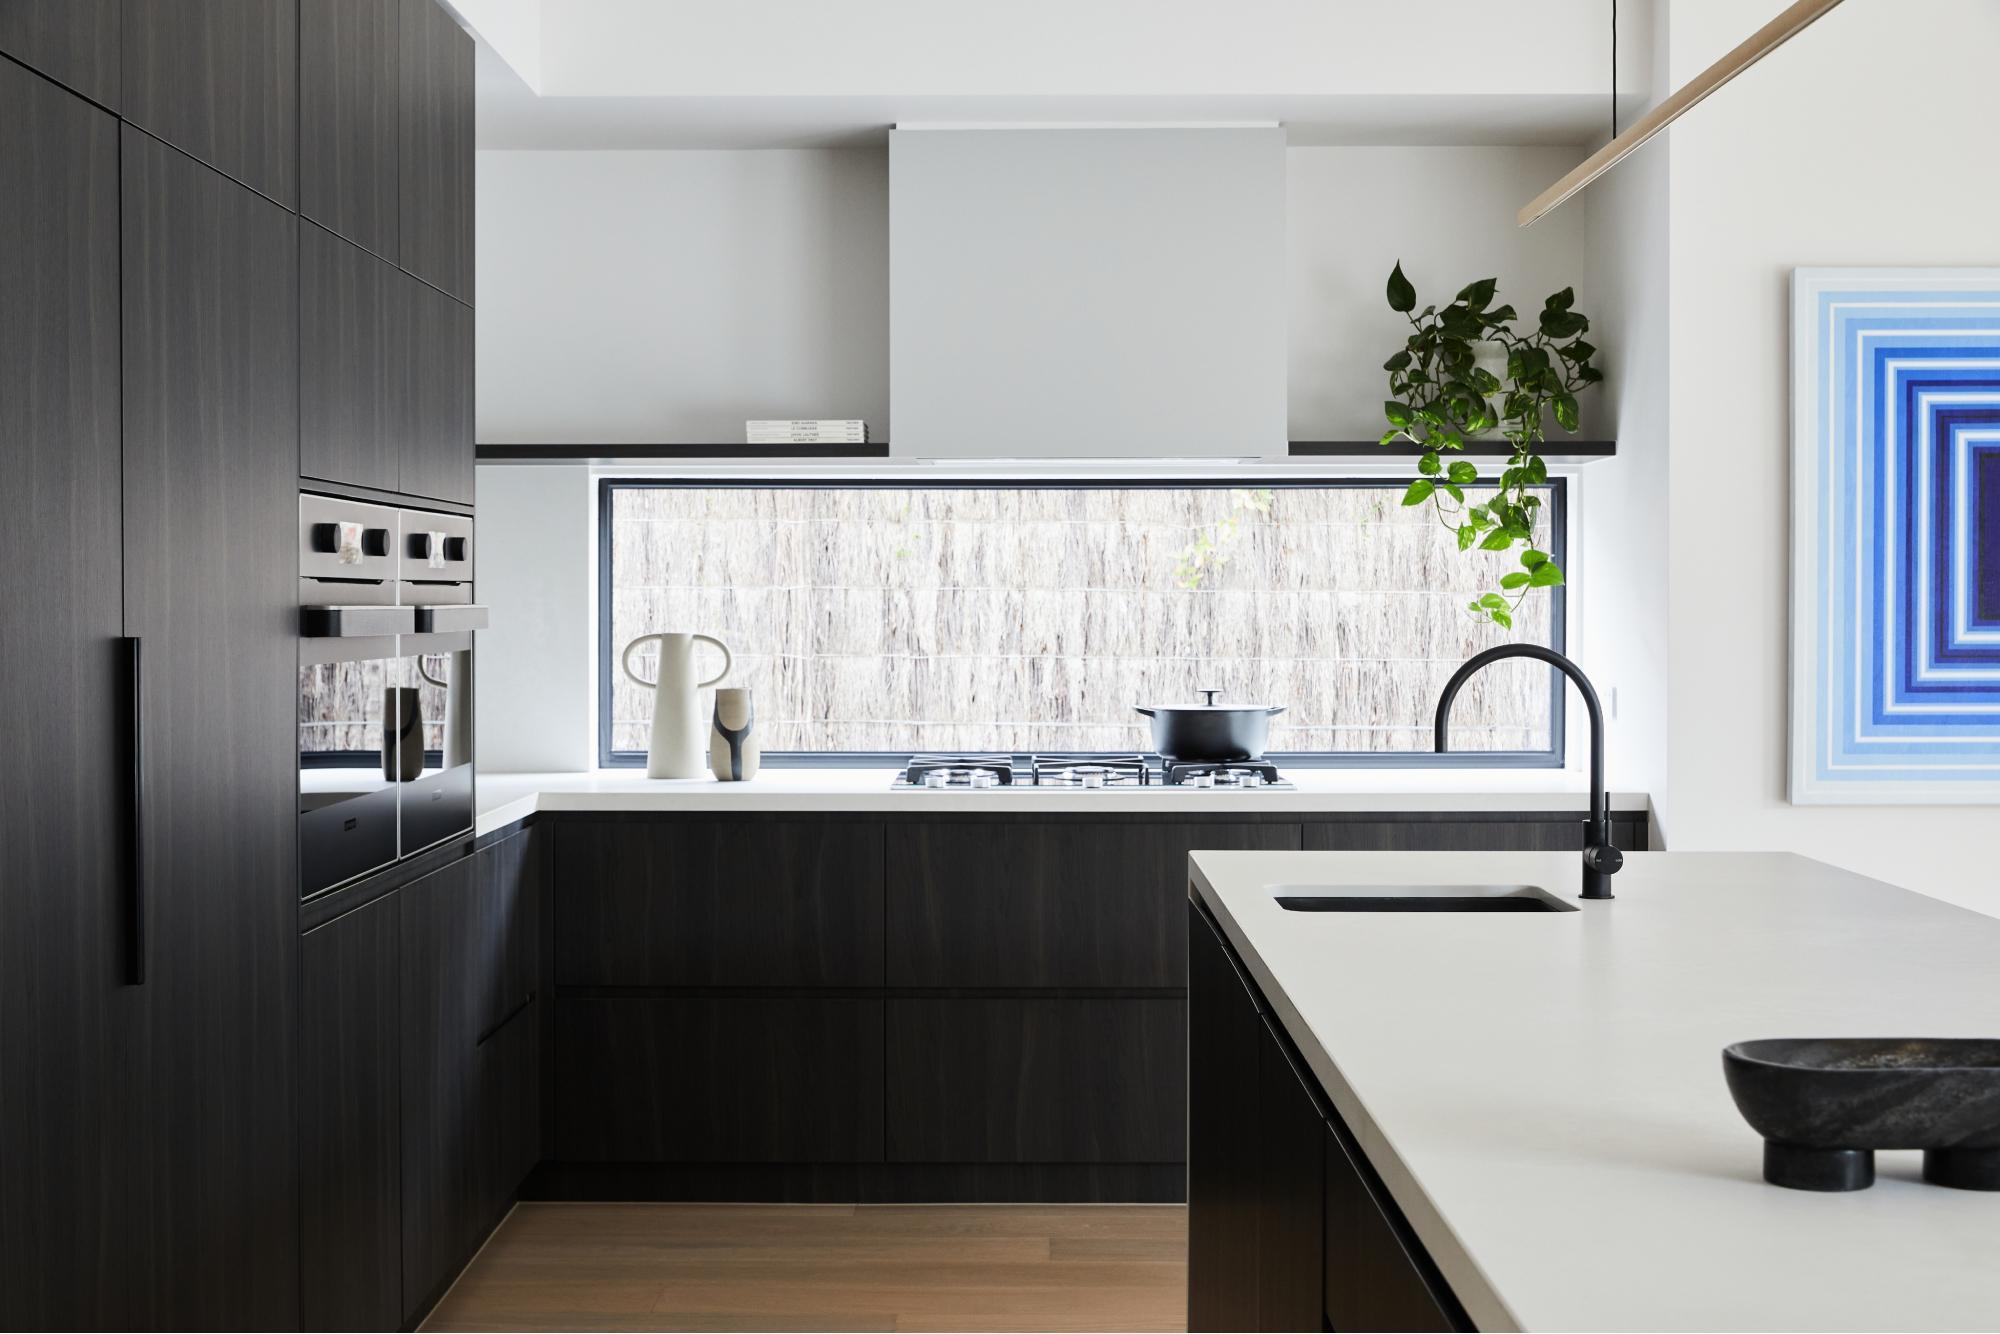 Seamless Cabinetry And Appliance Integration Create Minimalist Aesthetic